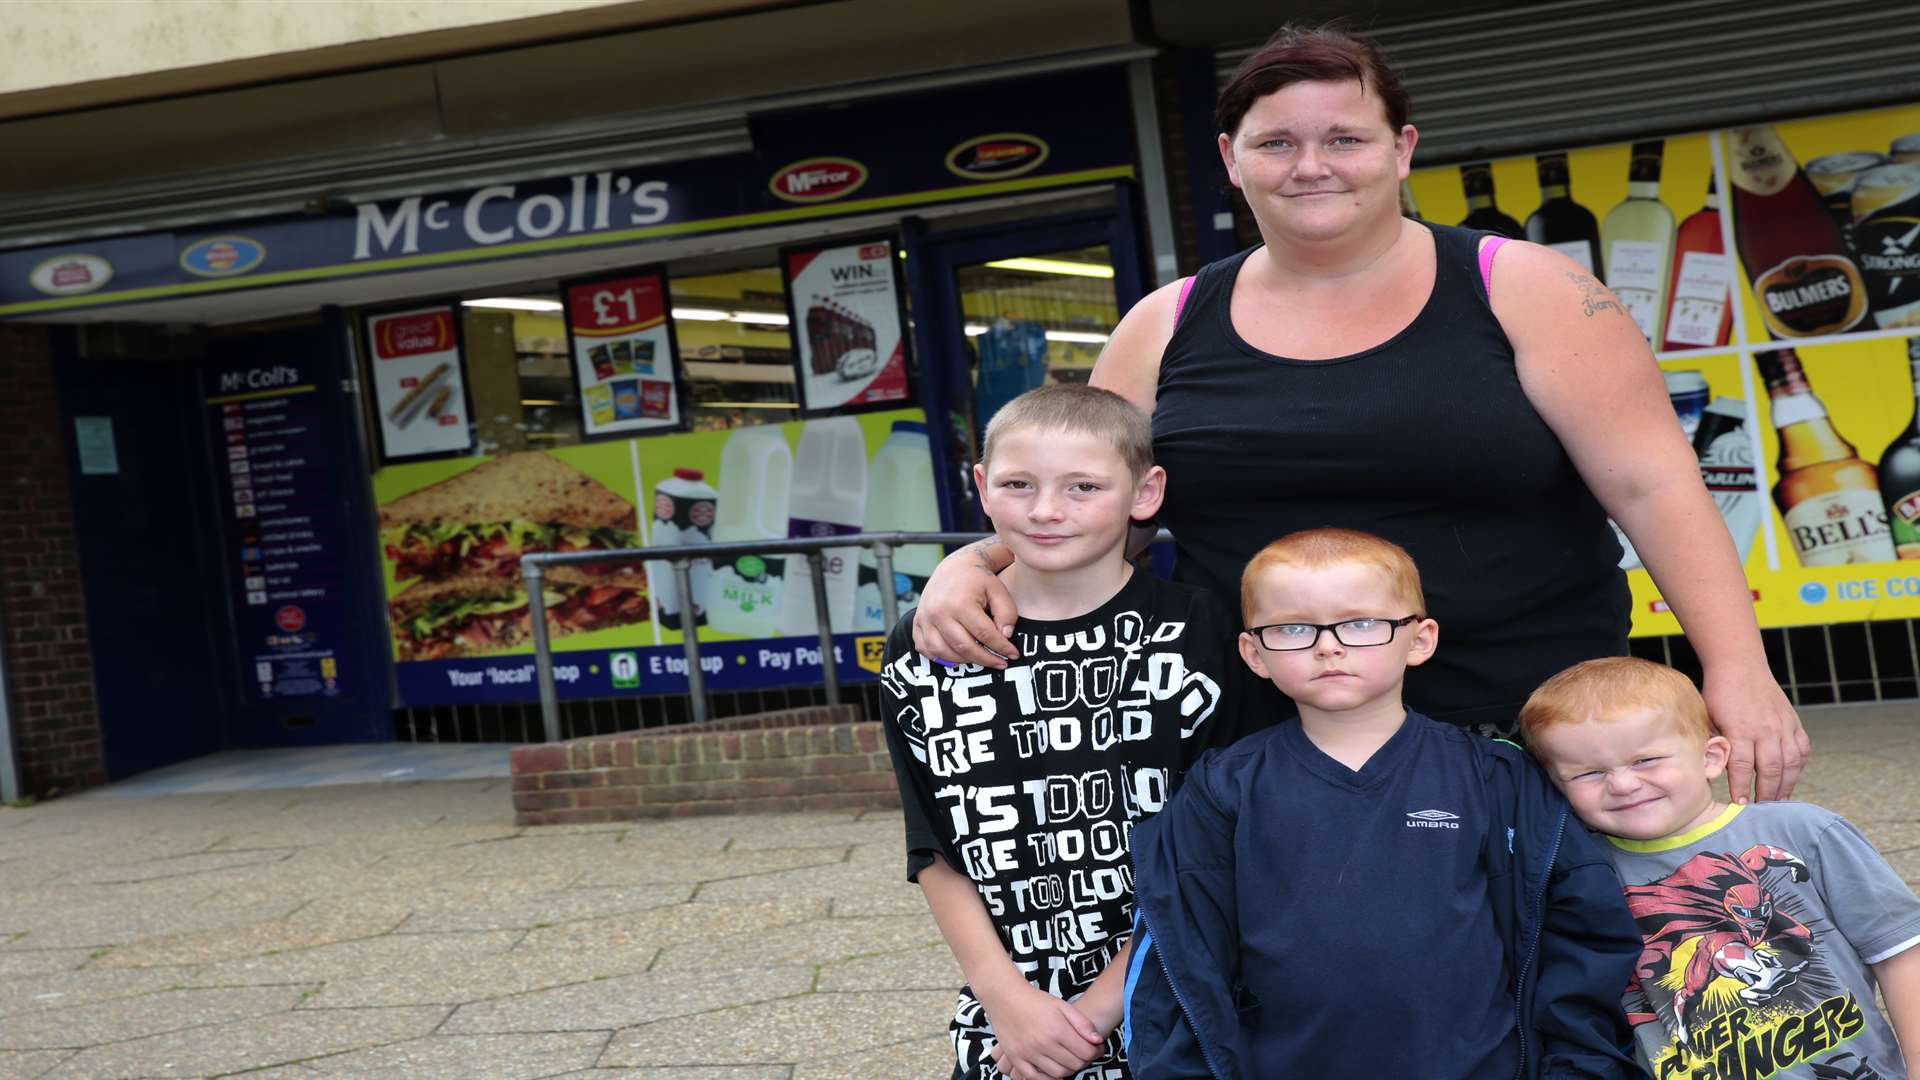 Sherry was with her son when a drunk man tried to steal cash from the store. Picture: Martin Apps